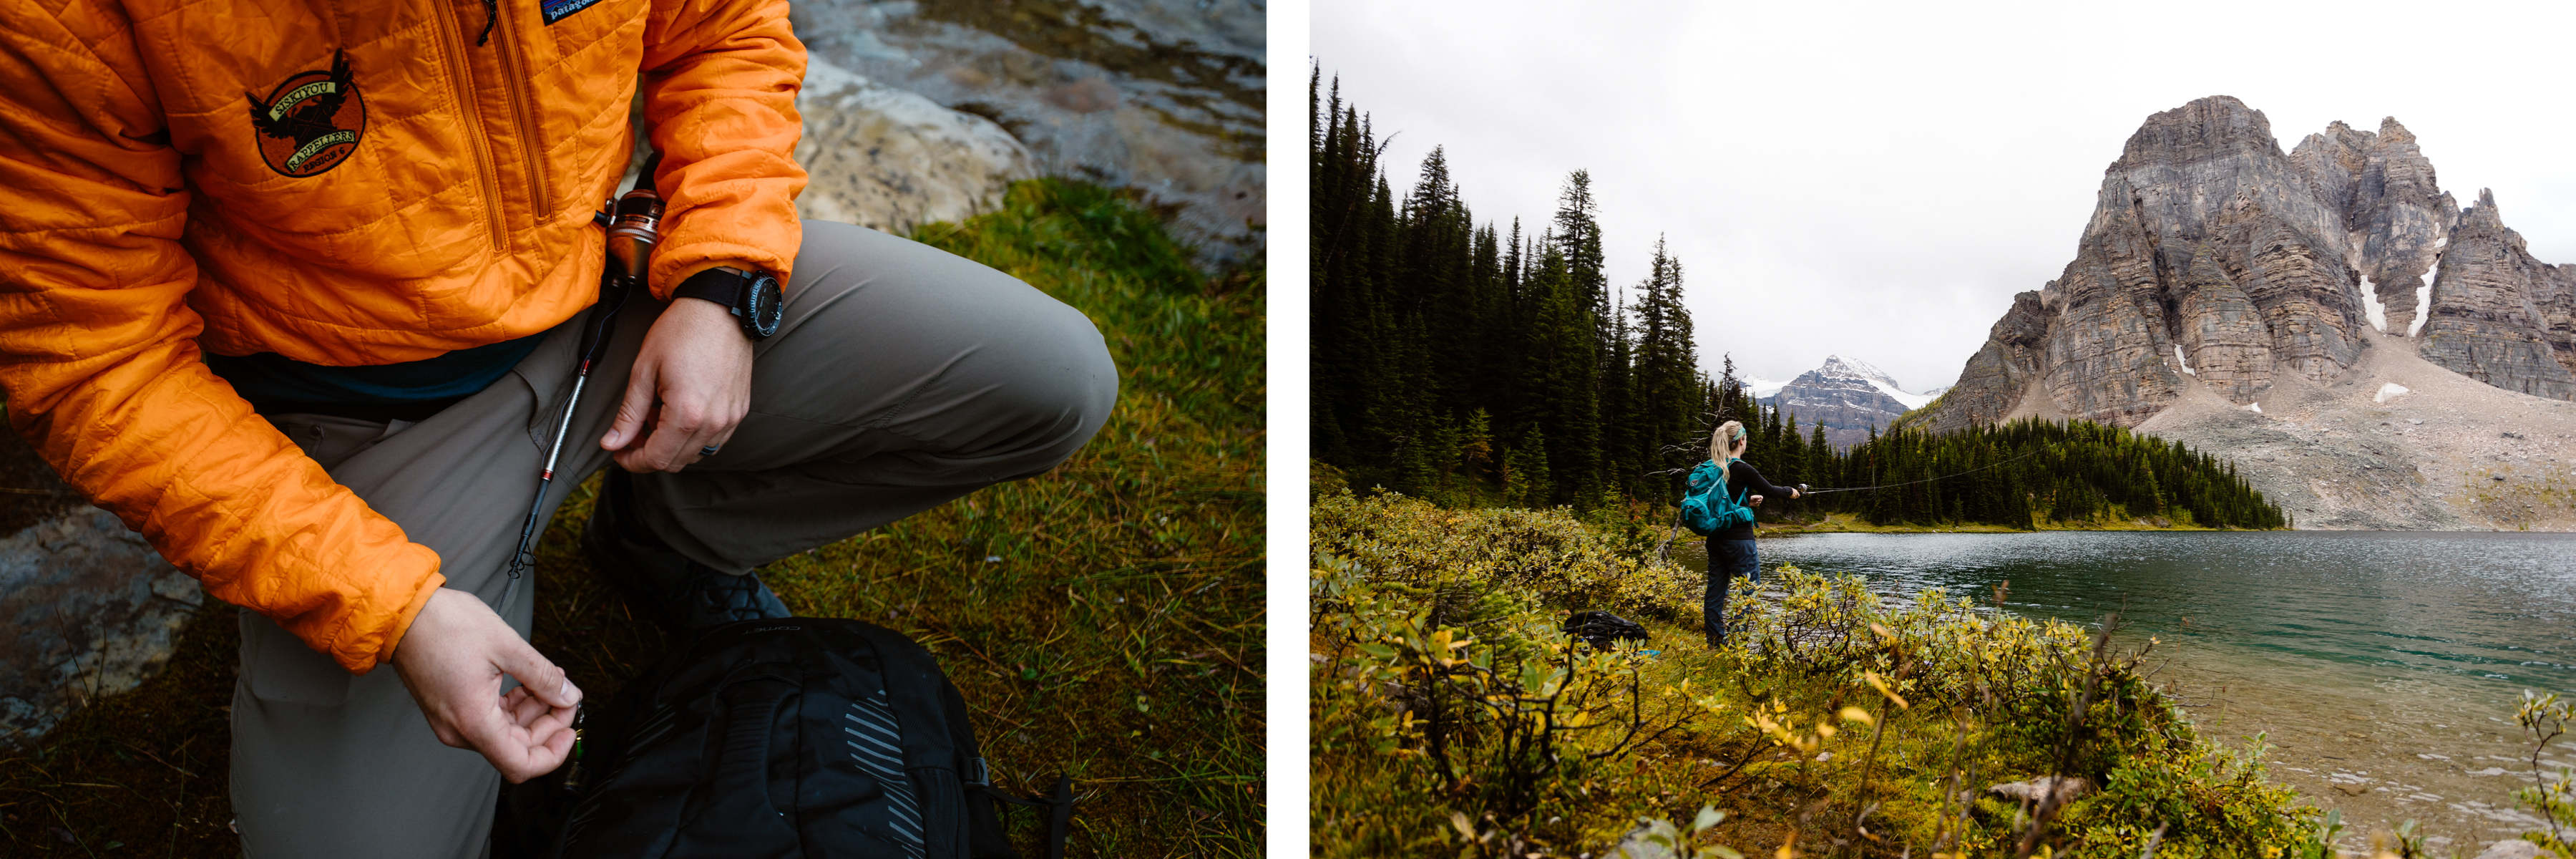 Mount Assiniboine Elopement Photographers at a Backcountry Lodge - Photo 64